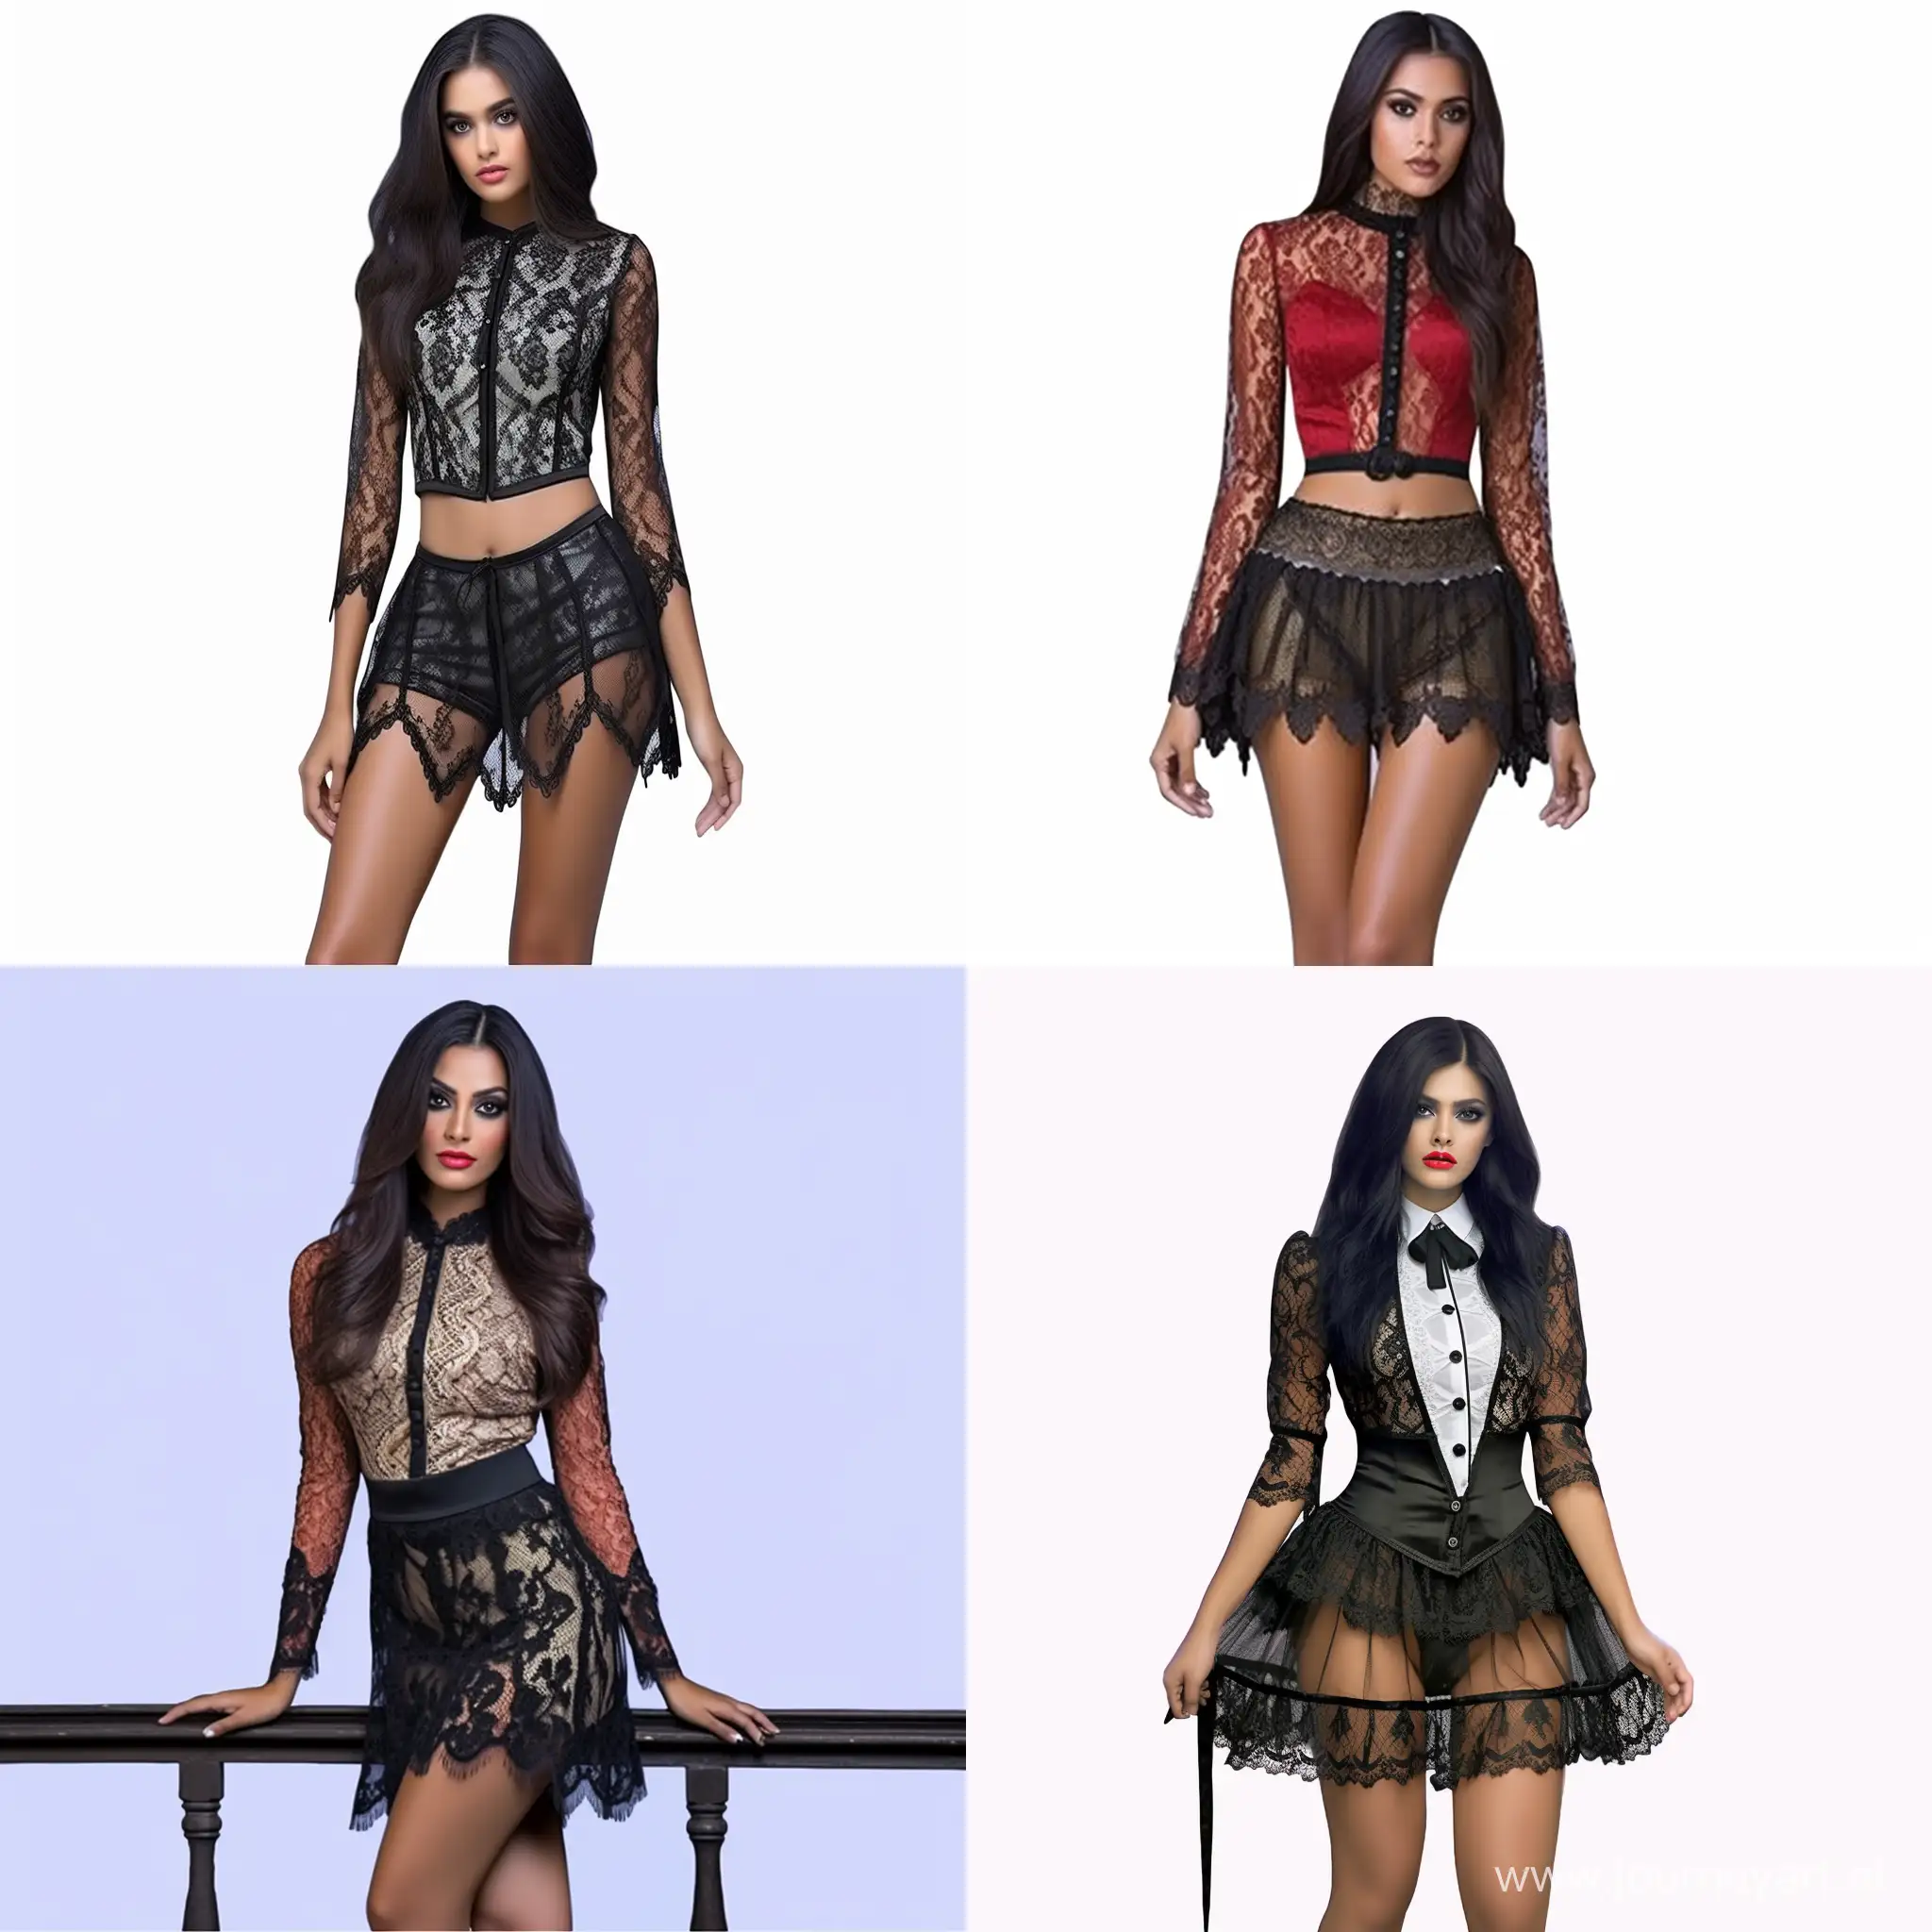 Stylish-Indian-Girl-in-Lace-Mini-Skirt-and-ThighHigh-Stockings-Suit